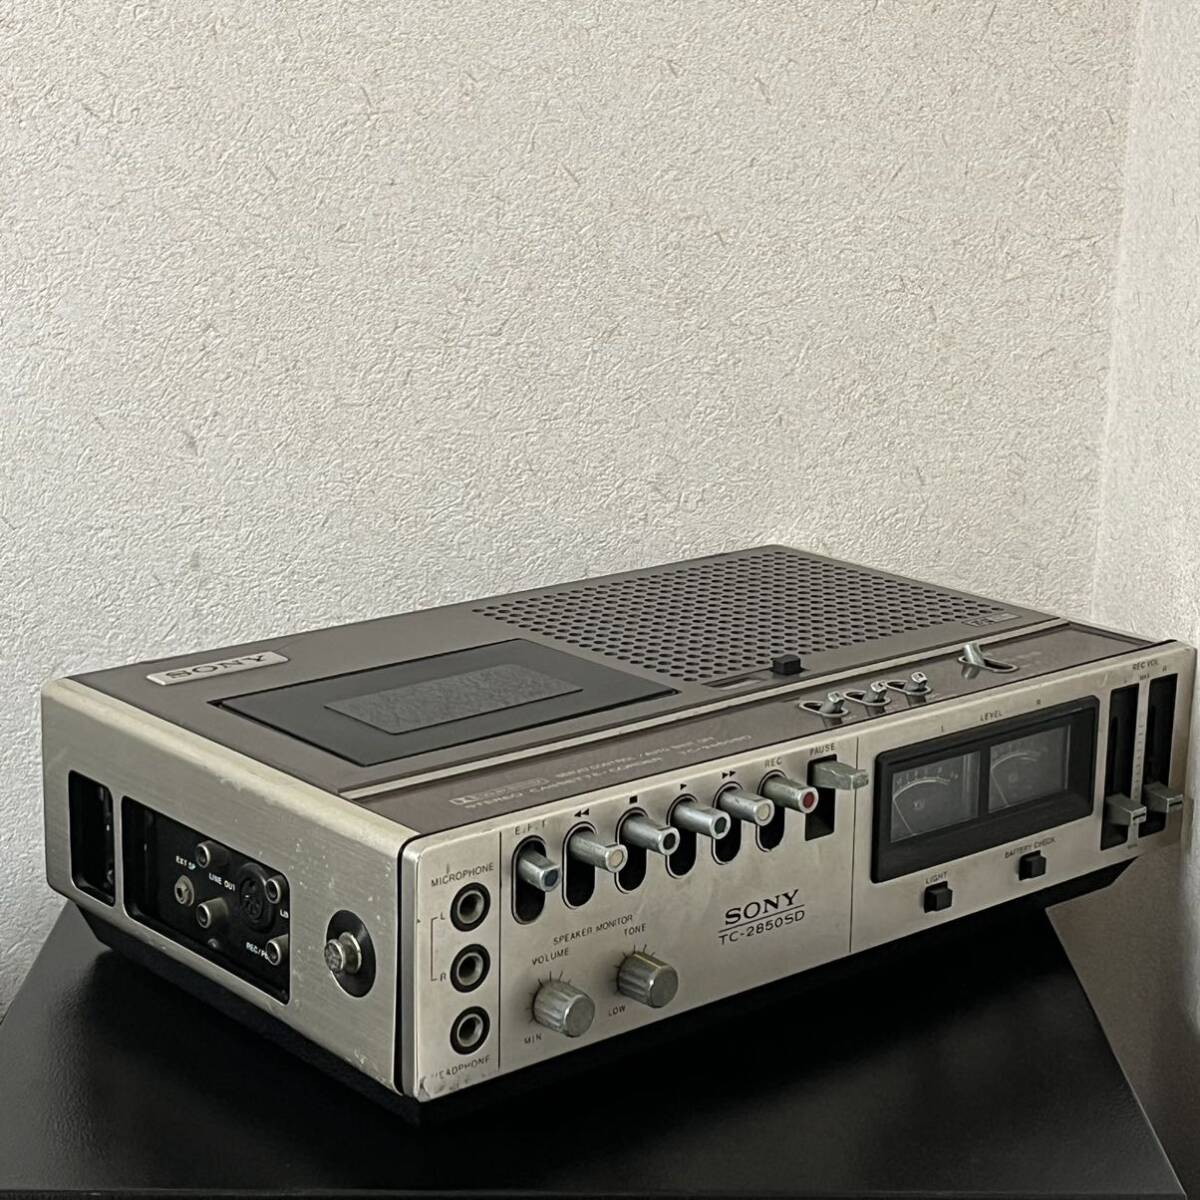 SONY STEREO CASSETTE-CORDER TC-2850 SD DOLBY SYSTEM SERVO CONTROL/AUTO SHUT OFF ソニー カセットデンスケ テープレコーダー ジャンク_画像8